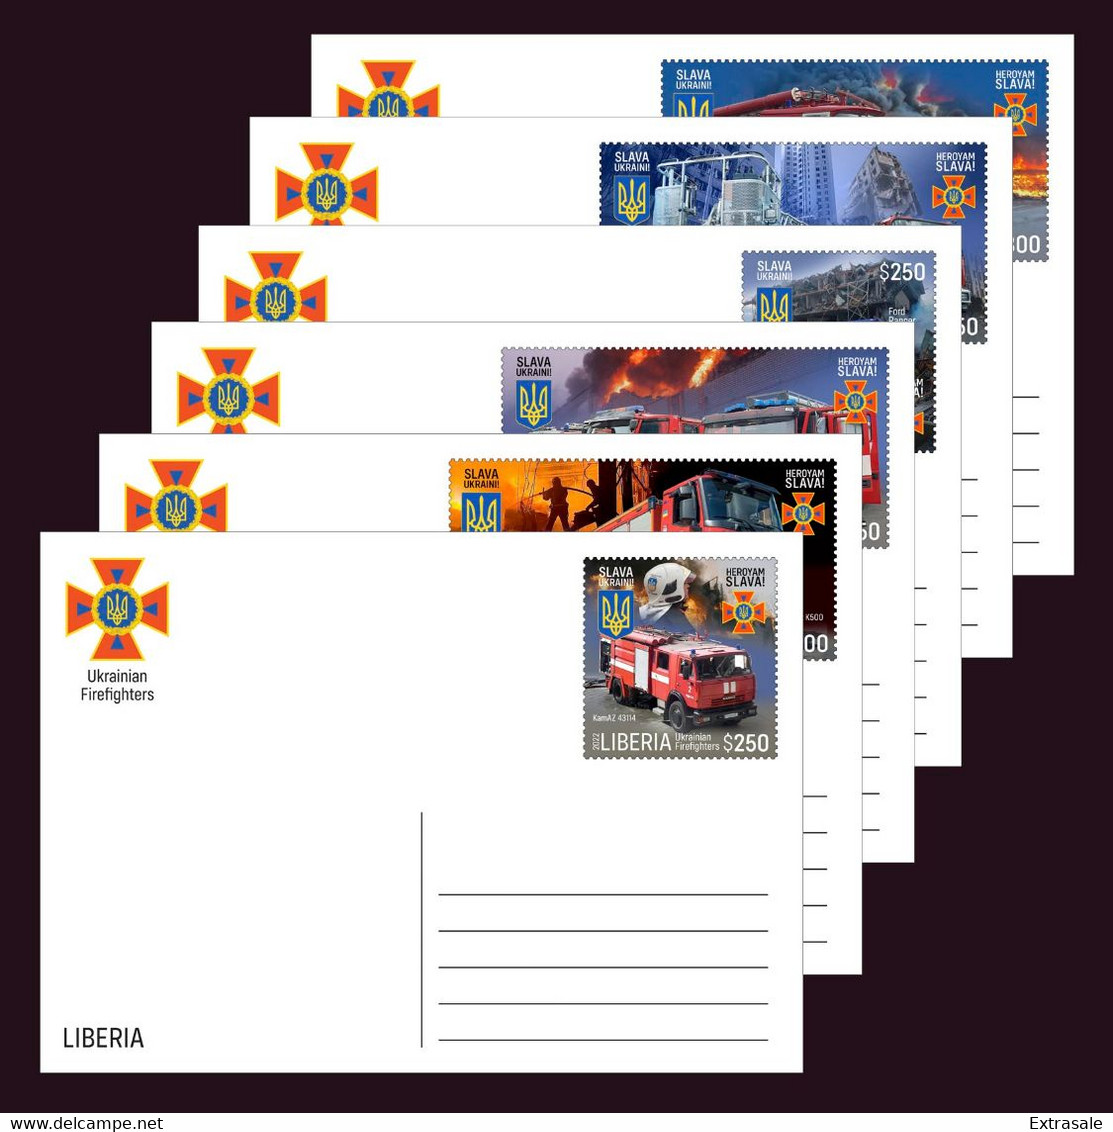 Liberia 2022 Stationery Cards MNH Heroic Firefighters Of Ukraine Fire Engines Collection Set 6 Cards - Liberia